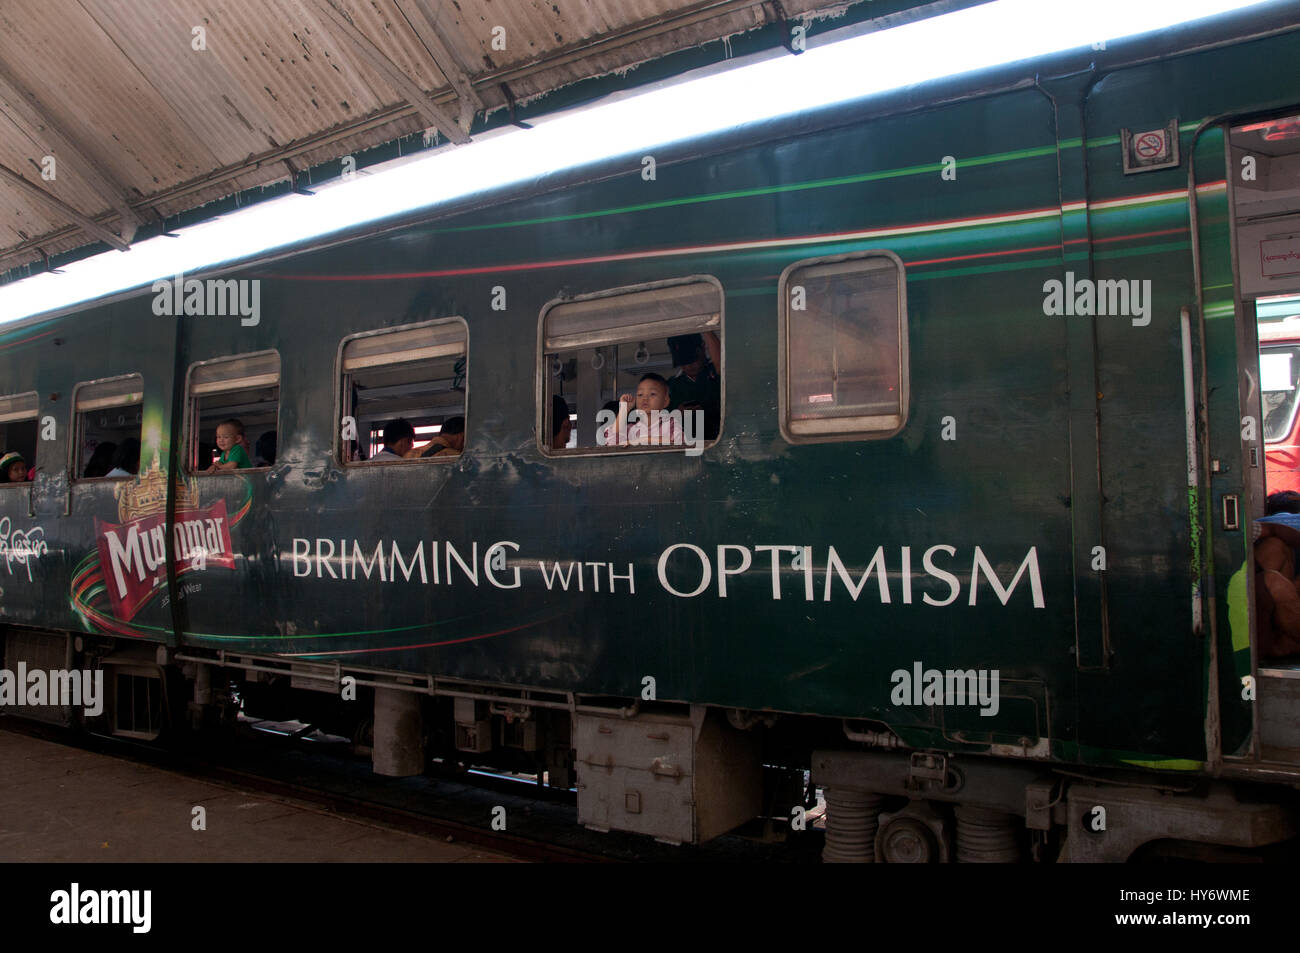 Myanmar (Burma). Yangon. Circular train with a carriage painted with an advert for beer and the word 'optimism'. Stock Photo